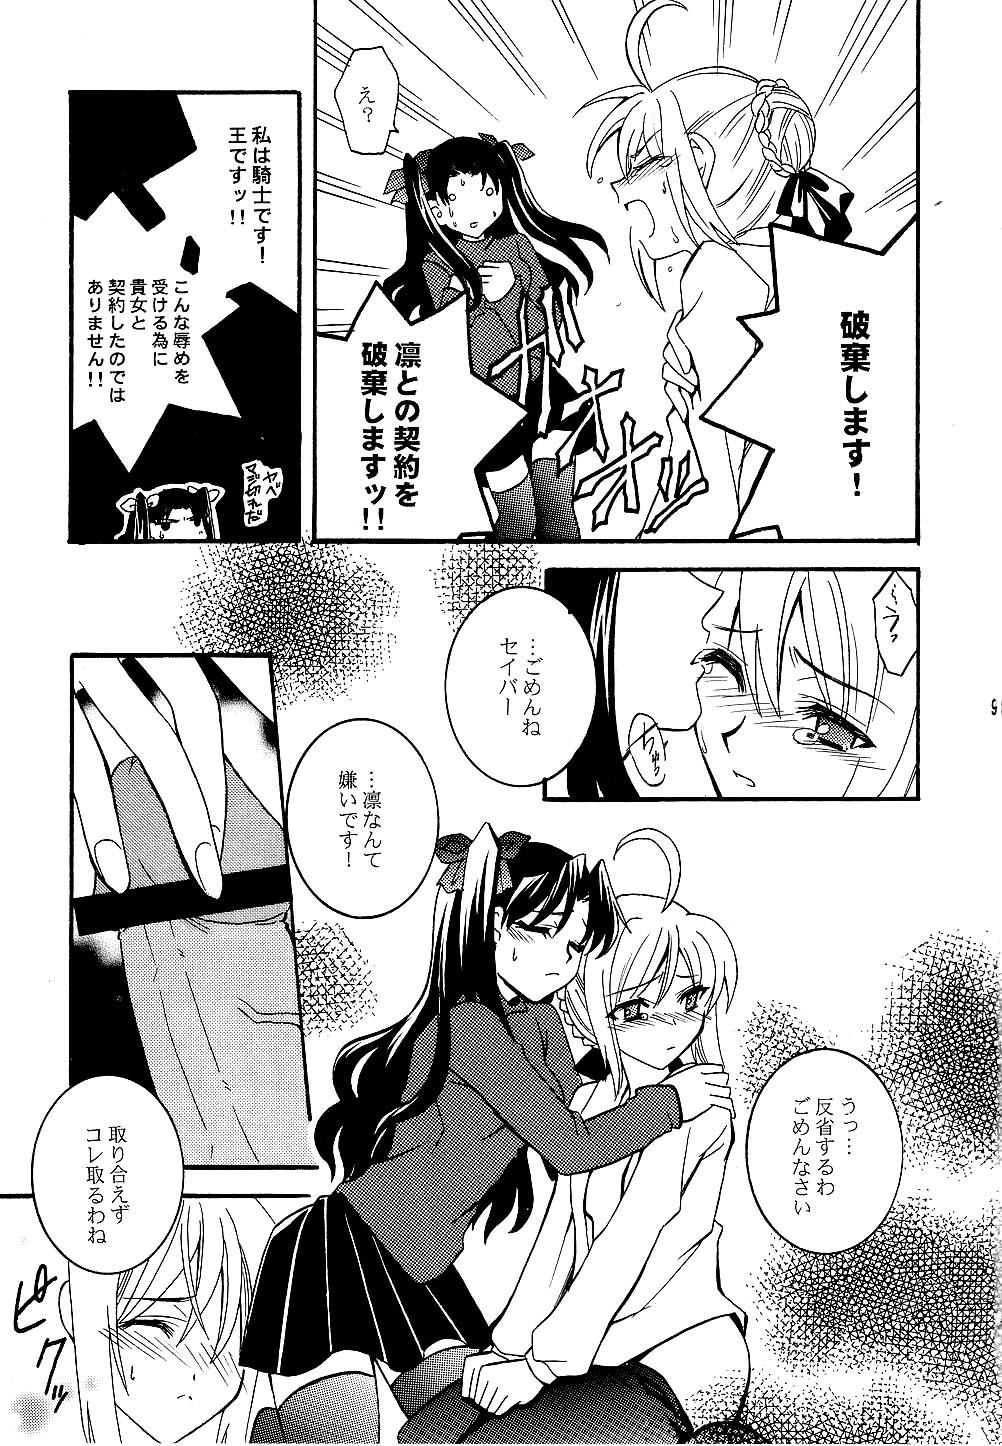 Muscle KING KILL 33 - Fate stay night Vecina - Page 8